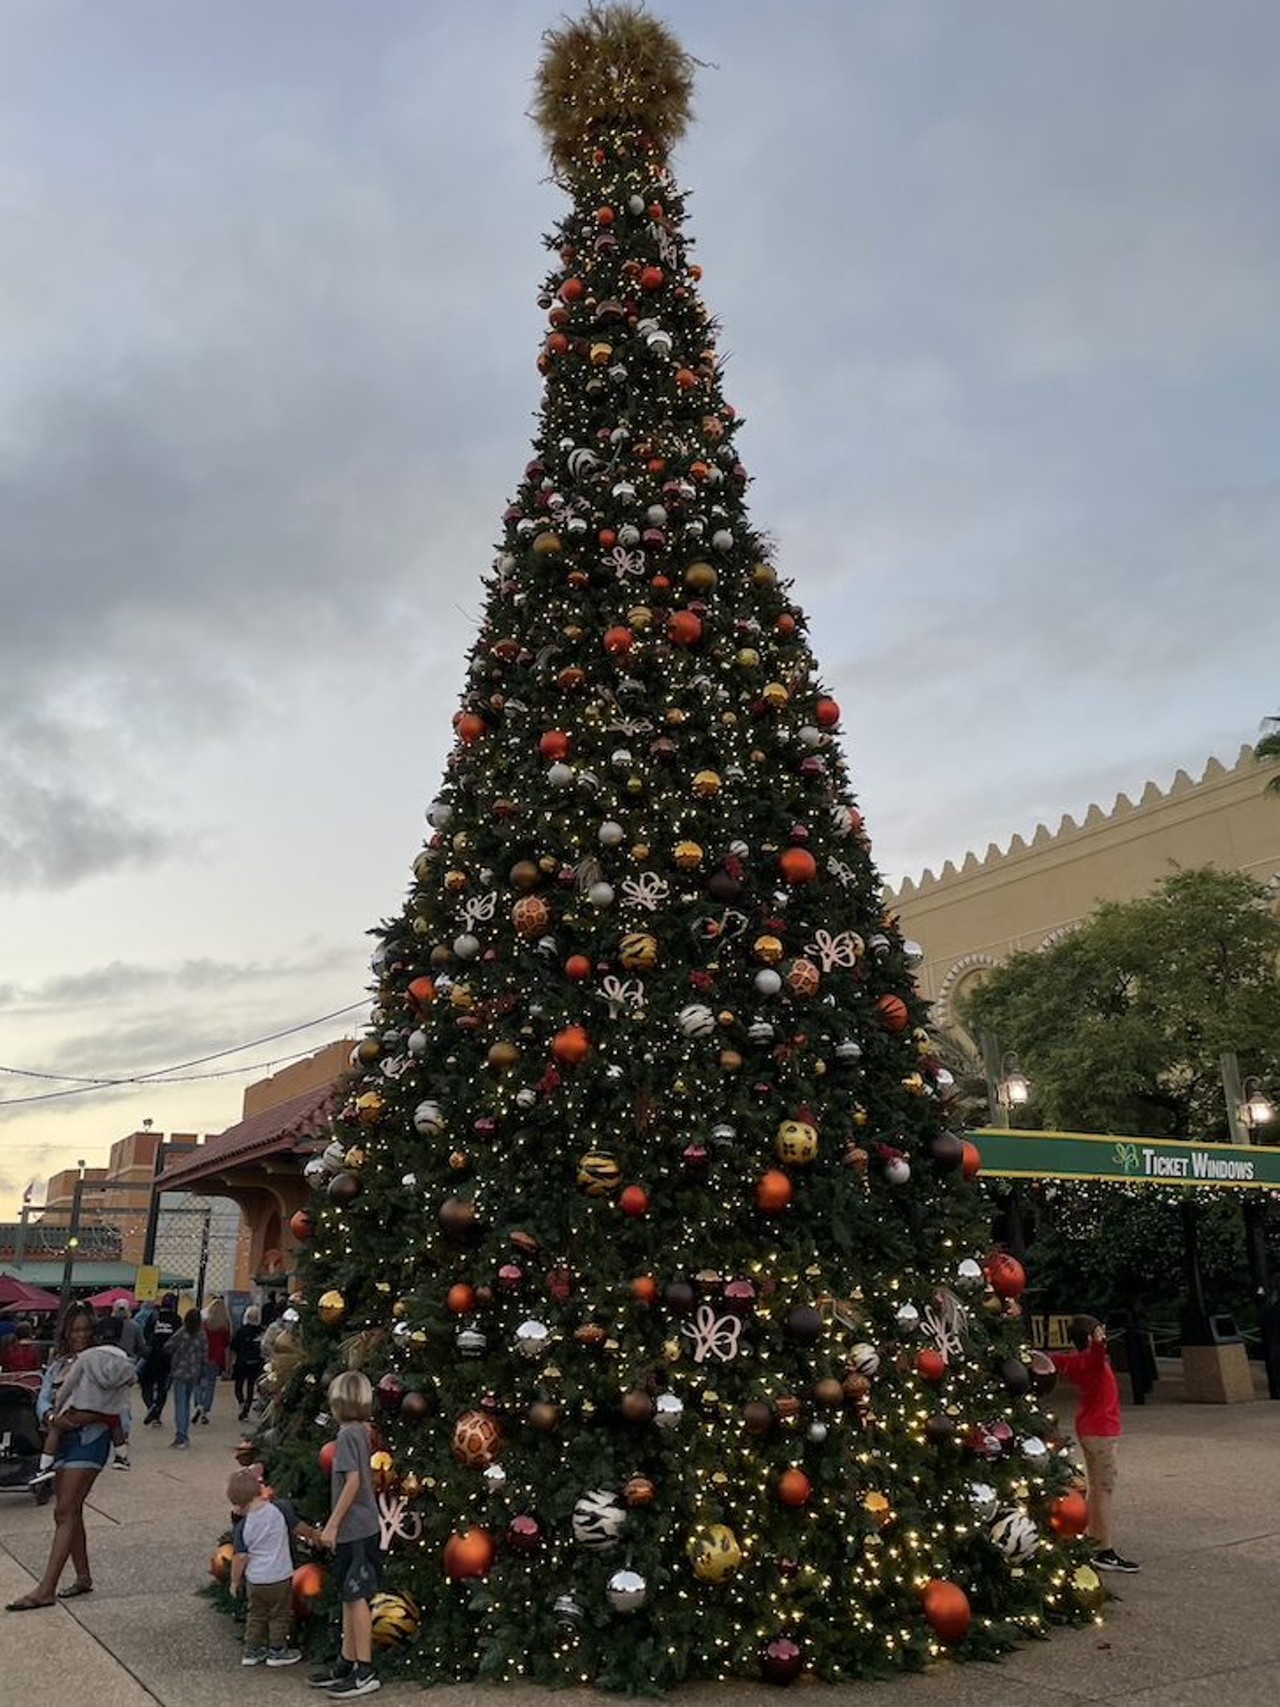 Busch Gardens Christmas Town has enough lights, sweets, music and fireworks to last two holiday seasons